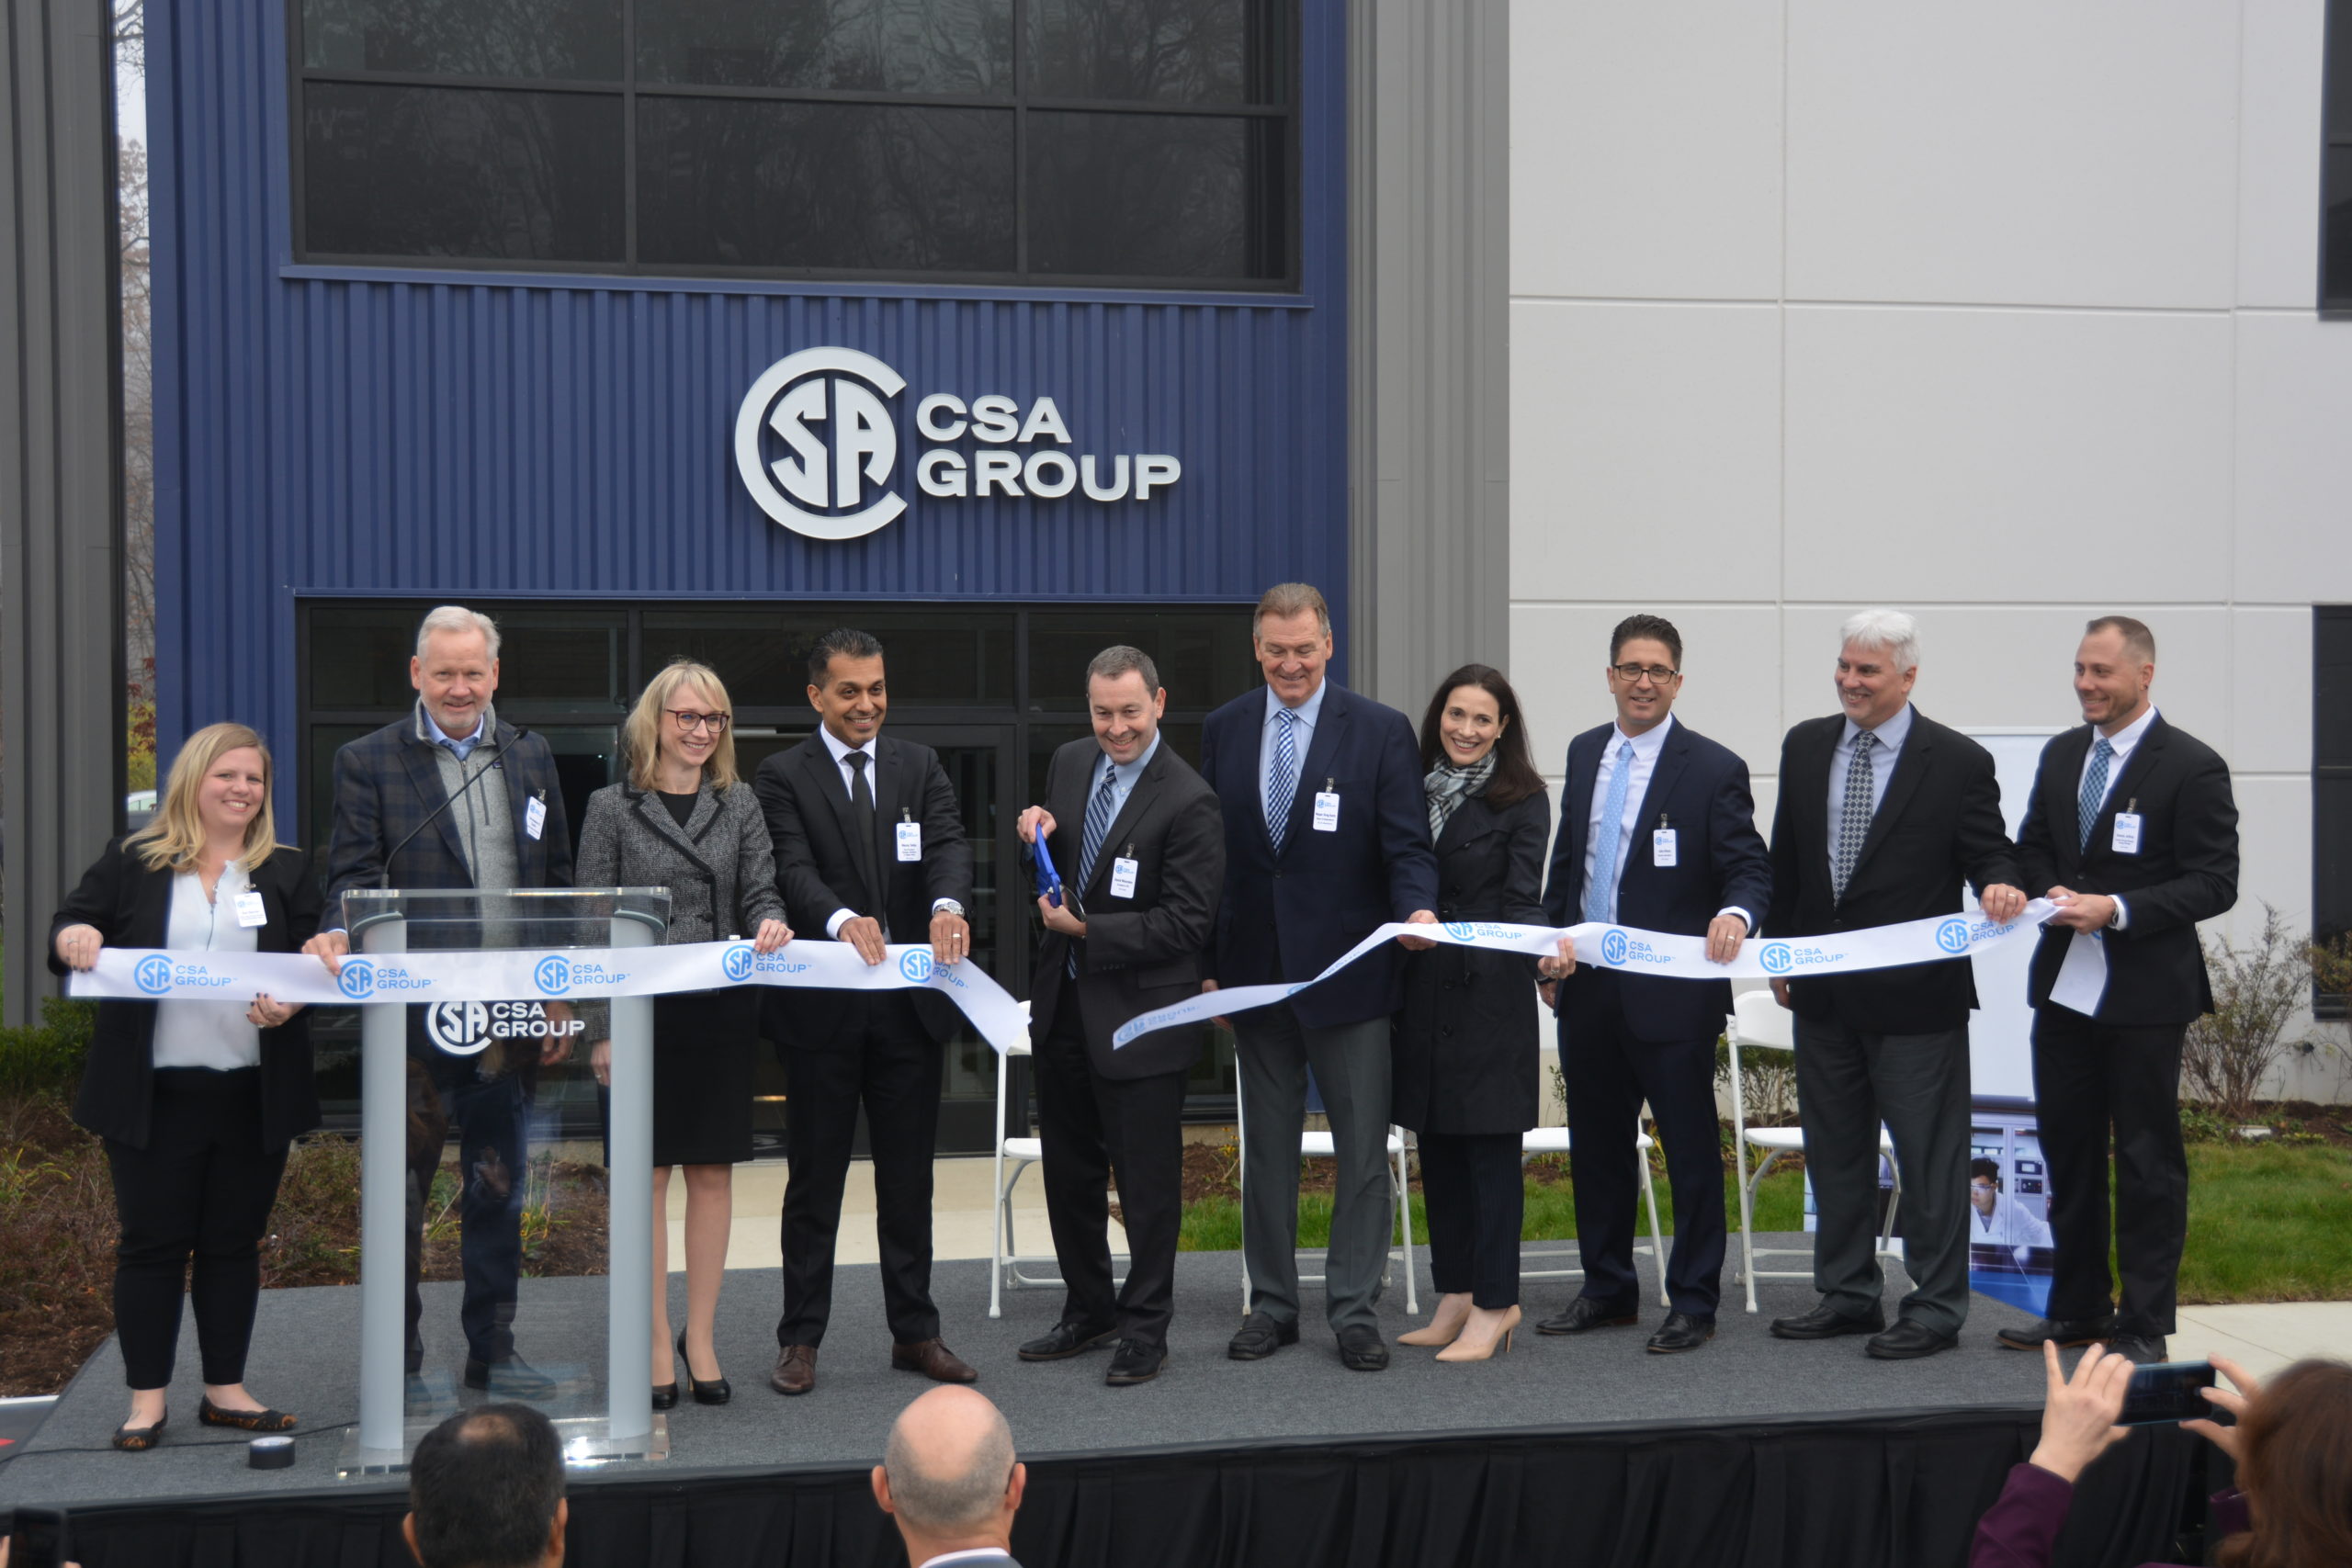 Featured Image. CSA Group Executive Team cutting the ribbon at the openning of the new Cleveland lab.